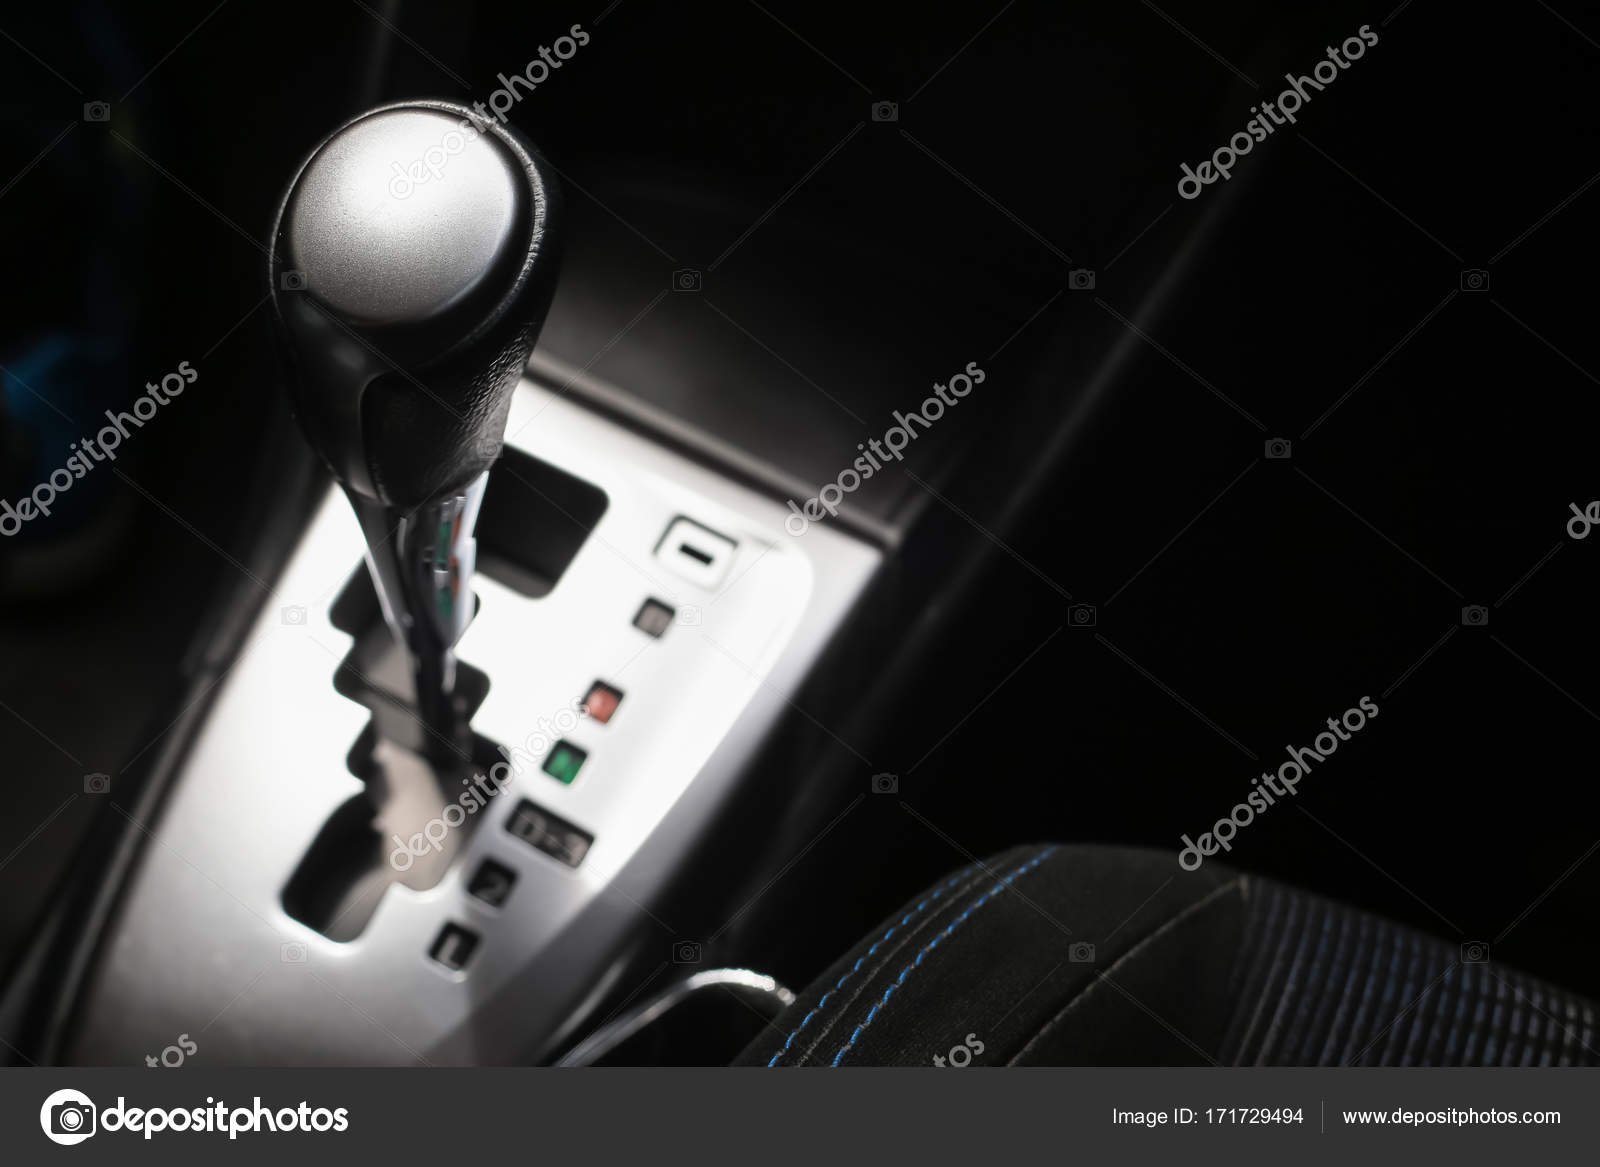 10,933 Automatic Gear Shift Images, Stock Photos, 3D objects, & Vectors